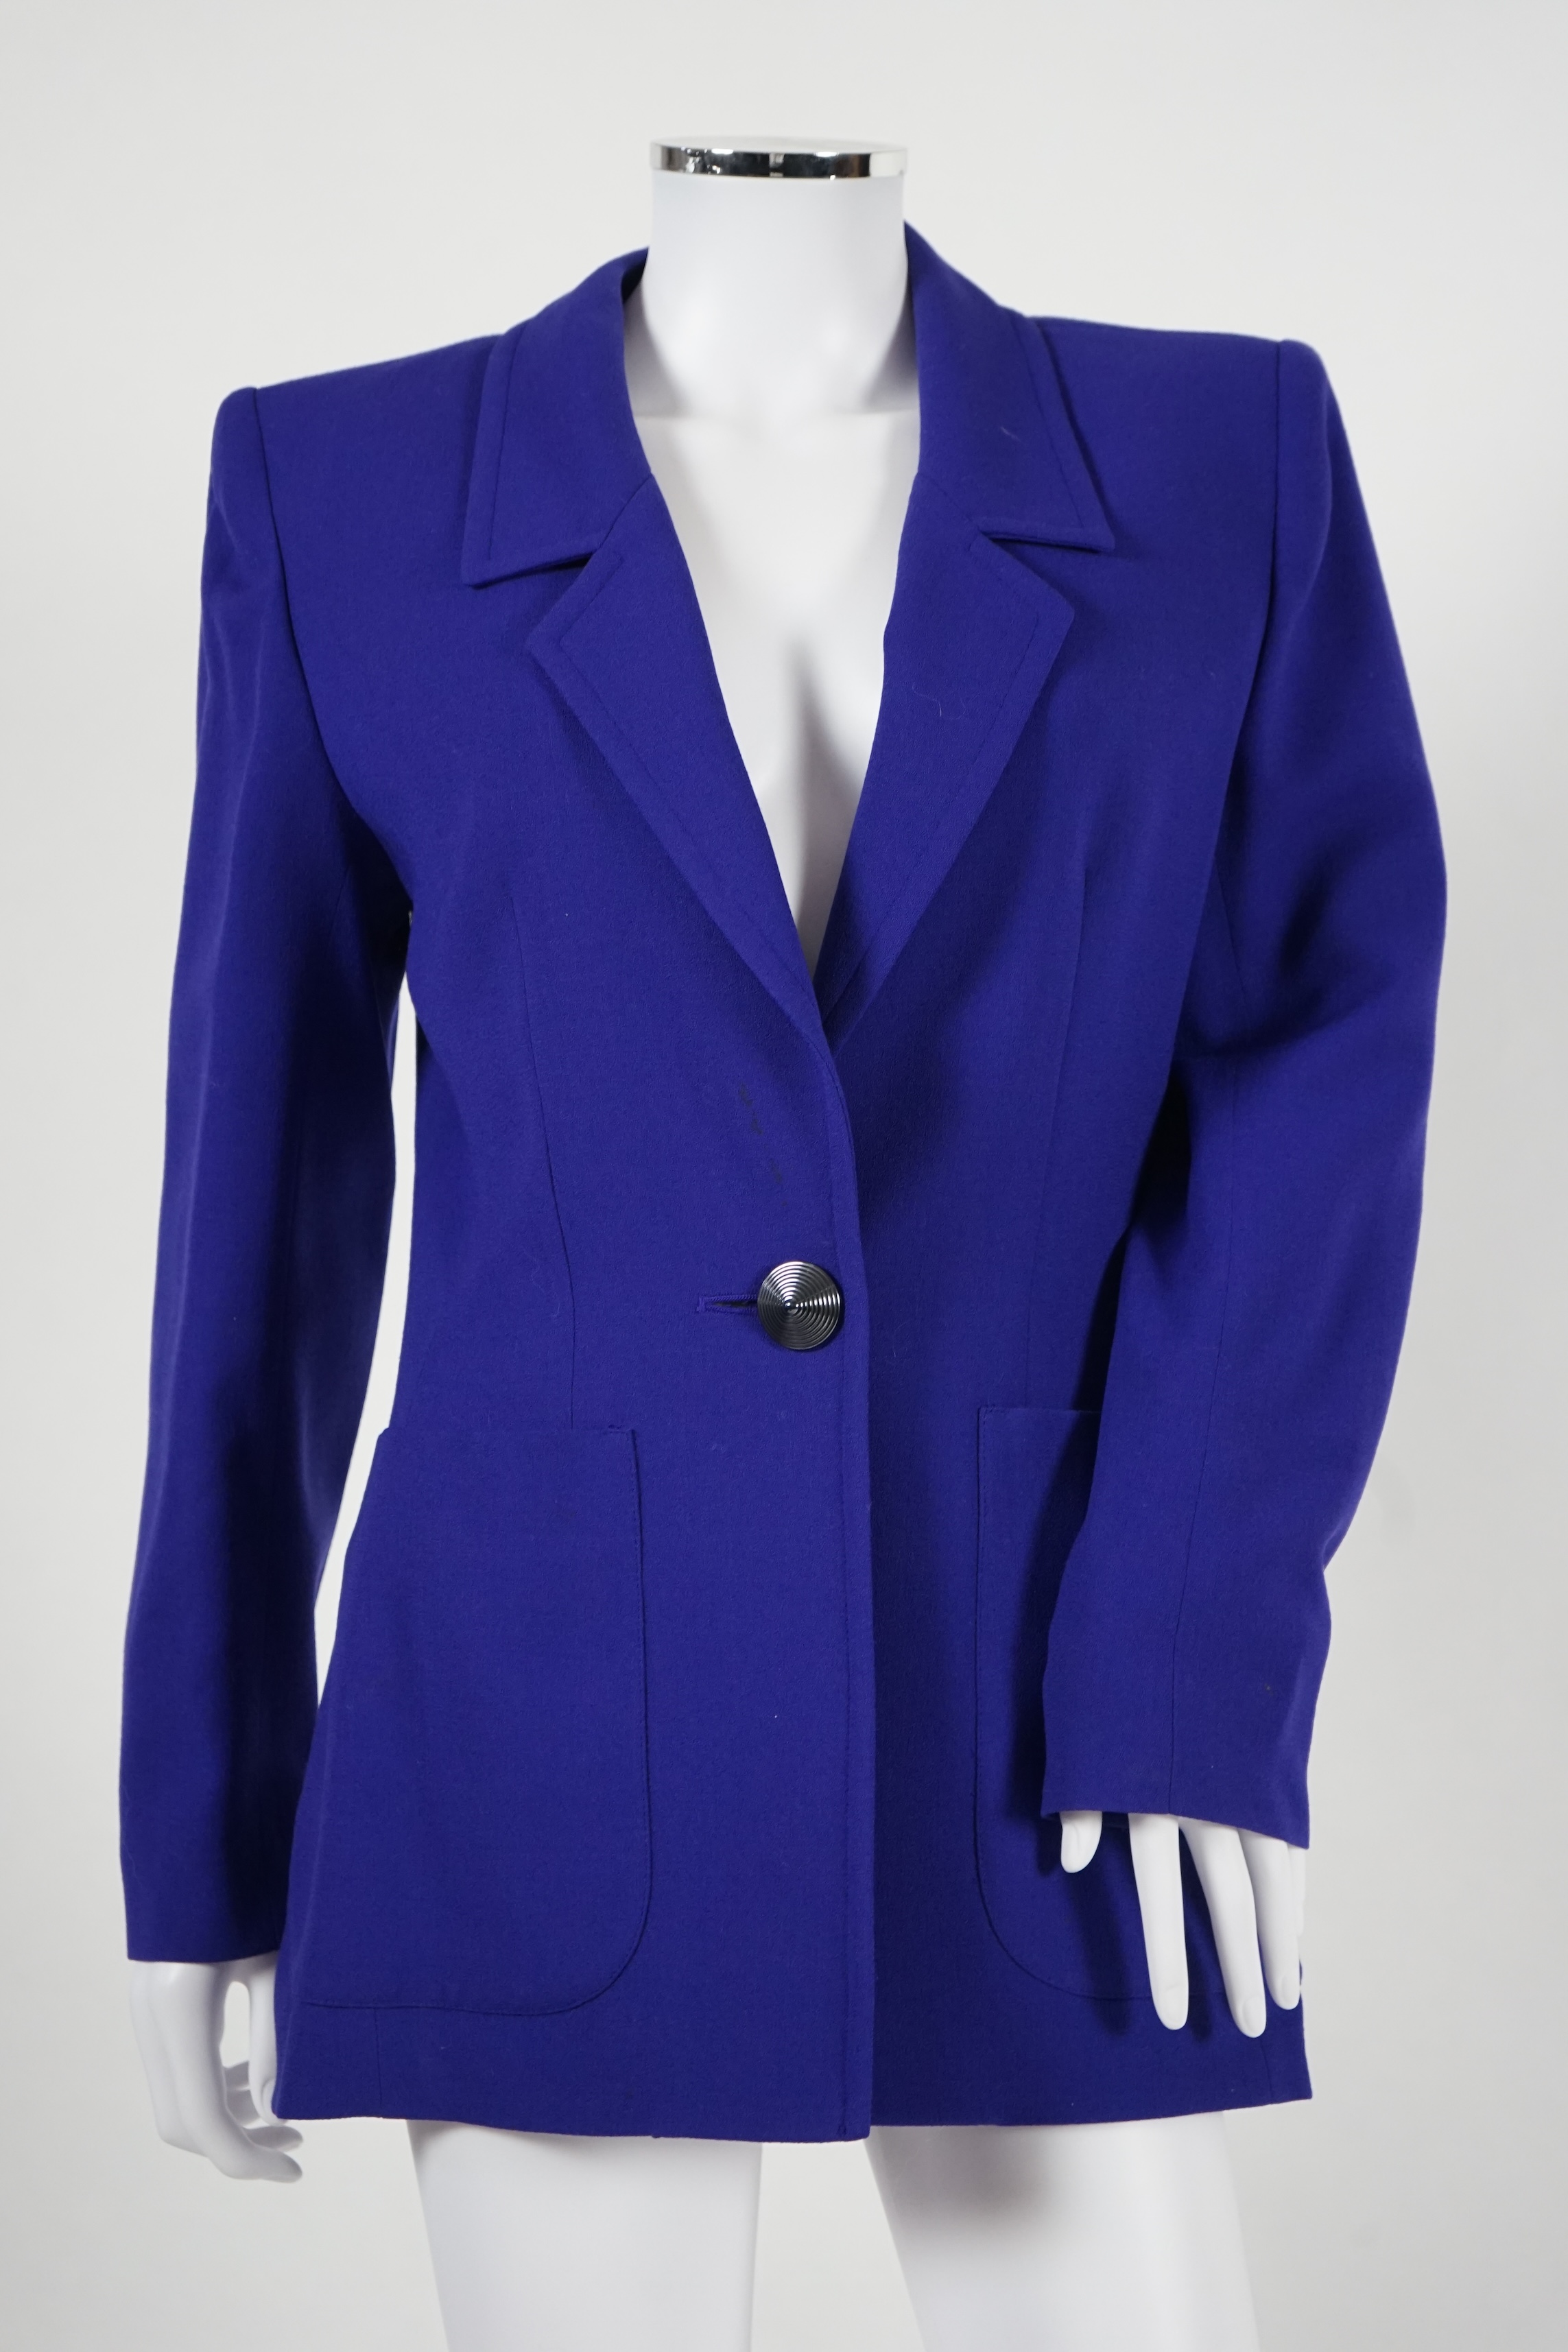 Three vintage Yves Saint Laurent variation lady's skirt suits, F 38 (UK 10). Please note alterations to make the waist smaller may have been carried out on some of the skirts. Proceeds to Happy Paws Puppy Rescue.